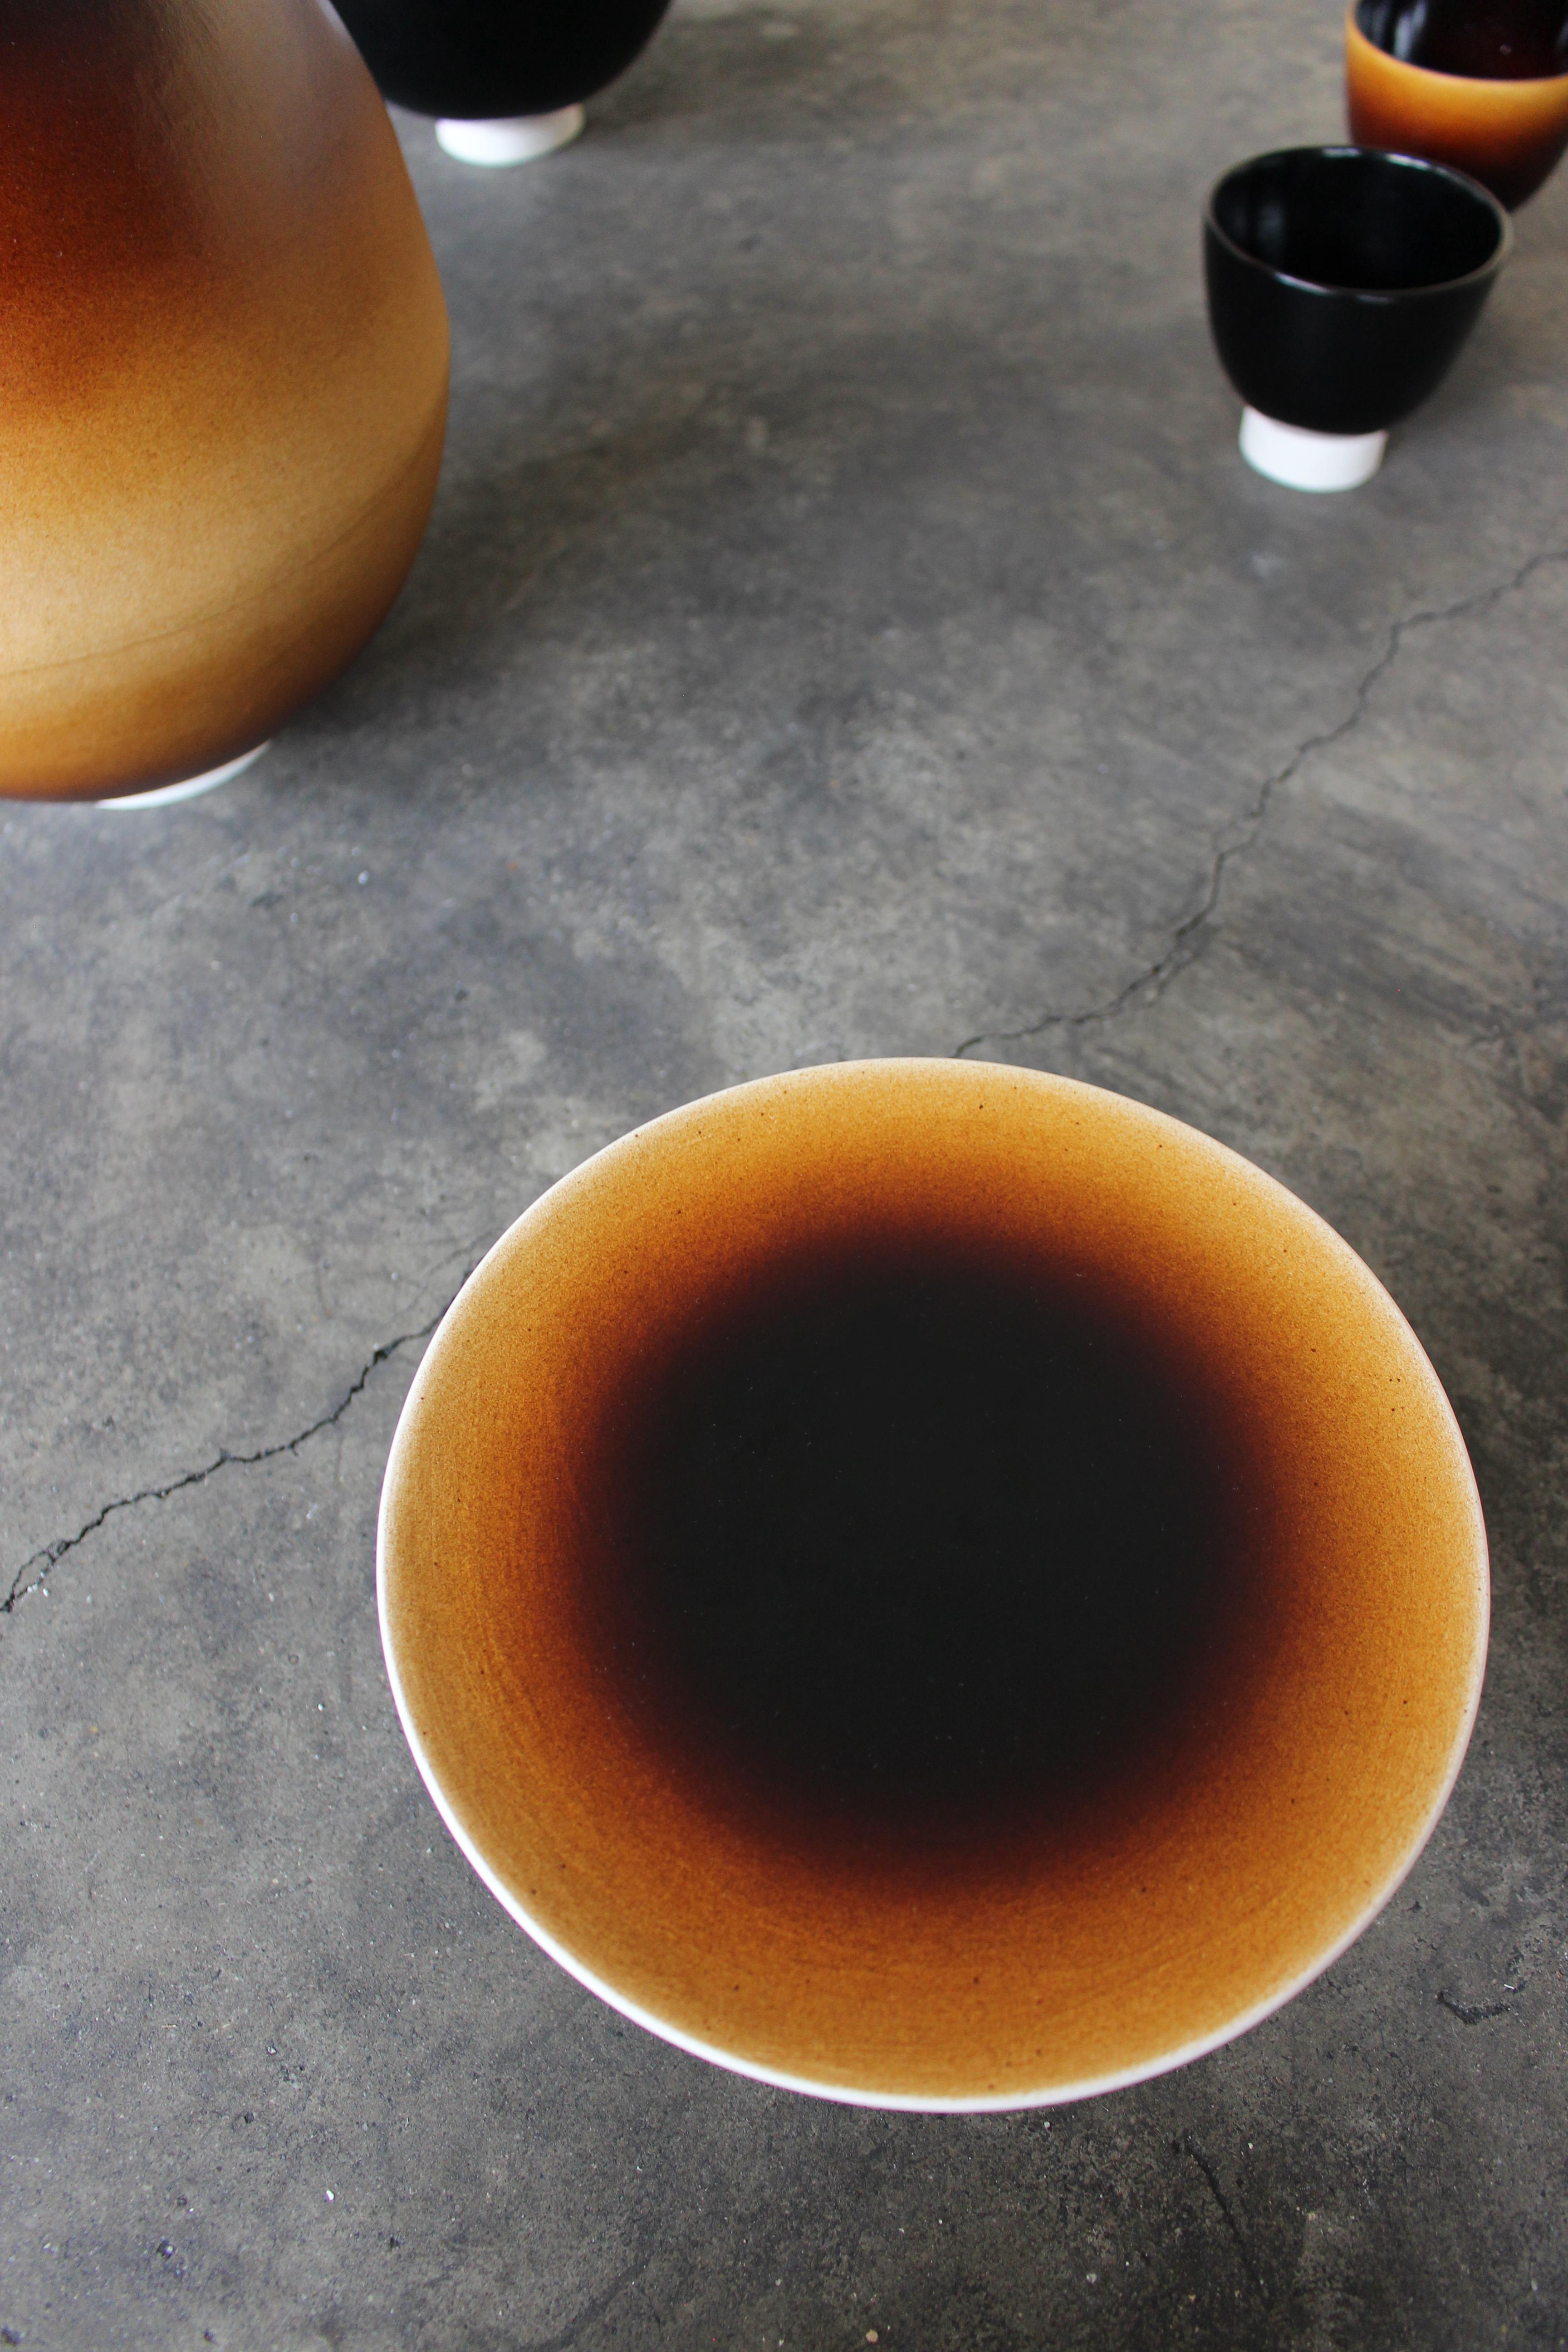 Ott Another Paradigmatic Handmade Ceramic Bowl by Studio Yoon Seok-Hyeon For Sale 2